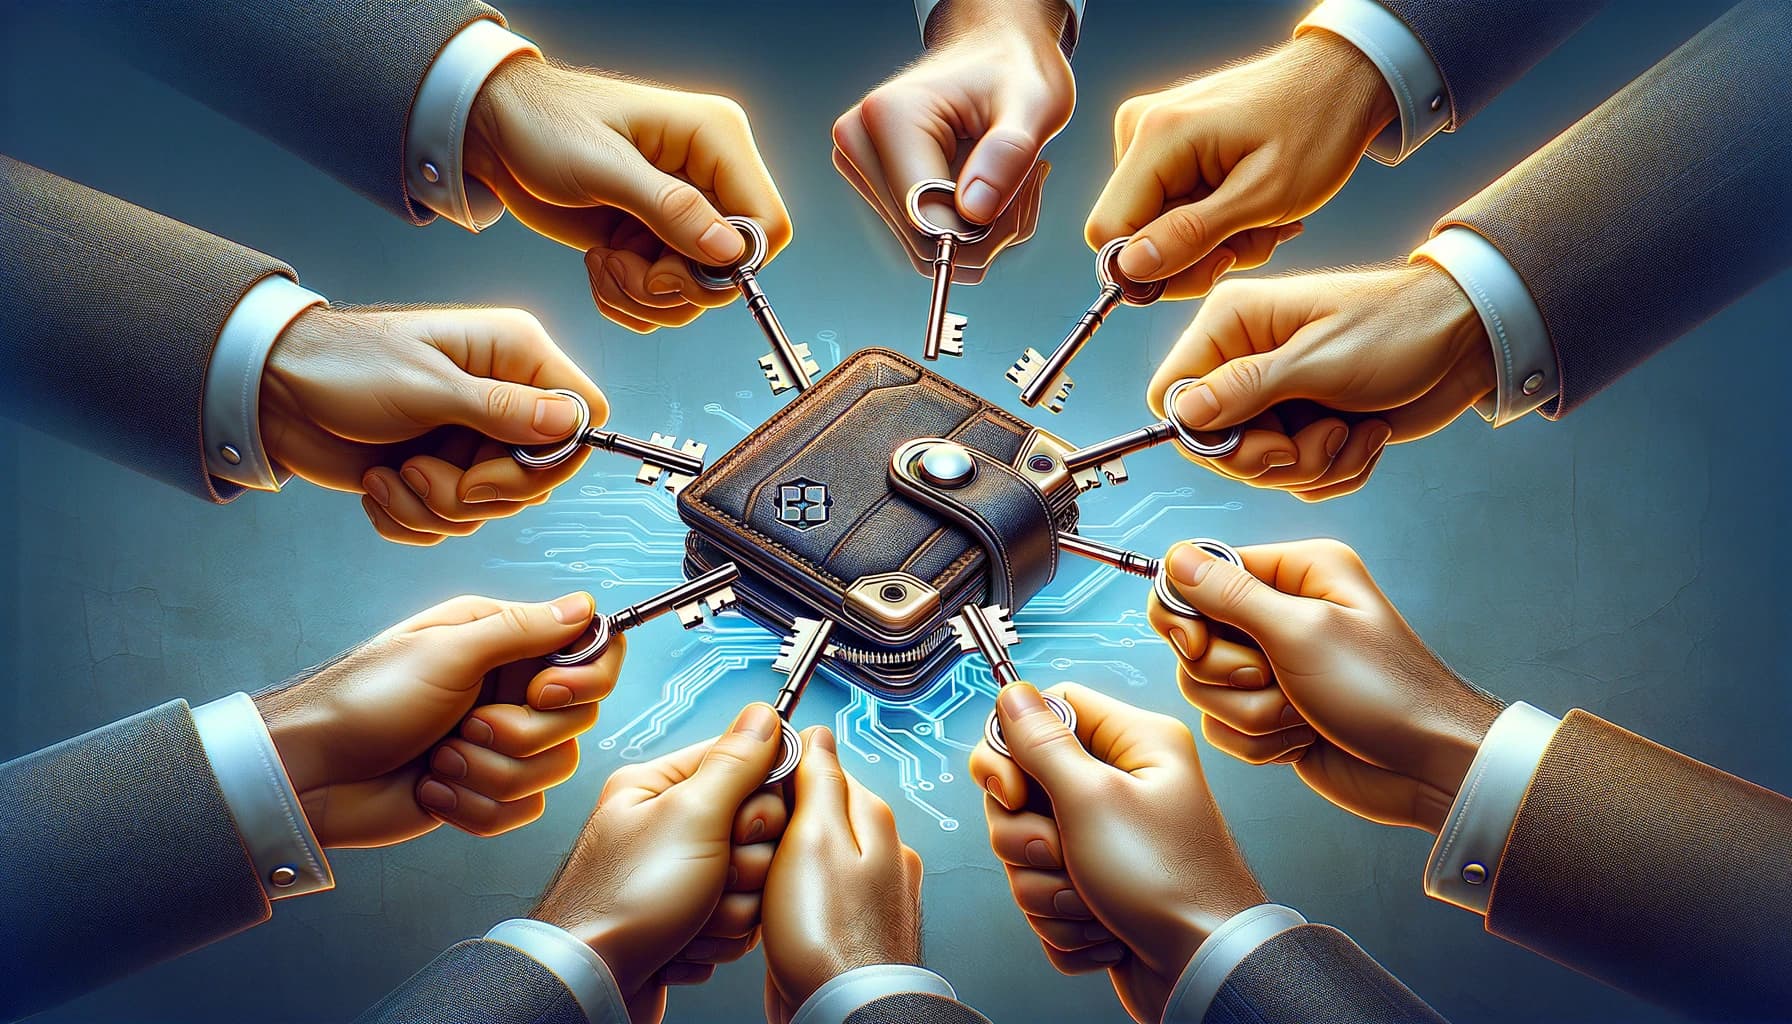 Bucket Technologies image showing a Bitcoin wallet surrounded by hands holding a key to open the wallet.